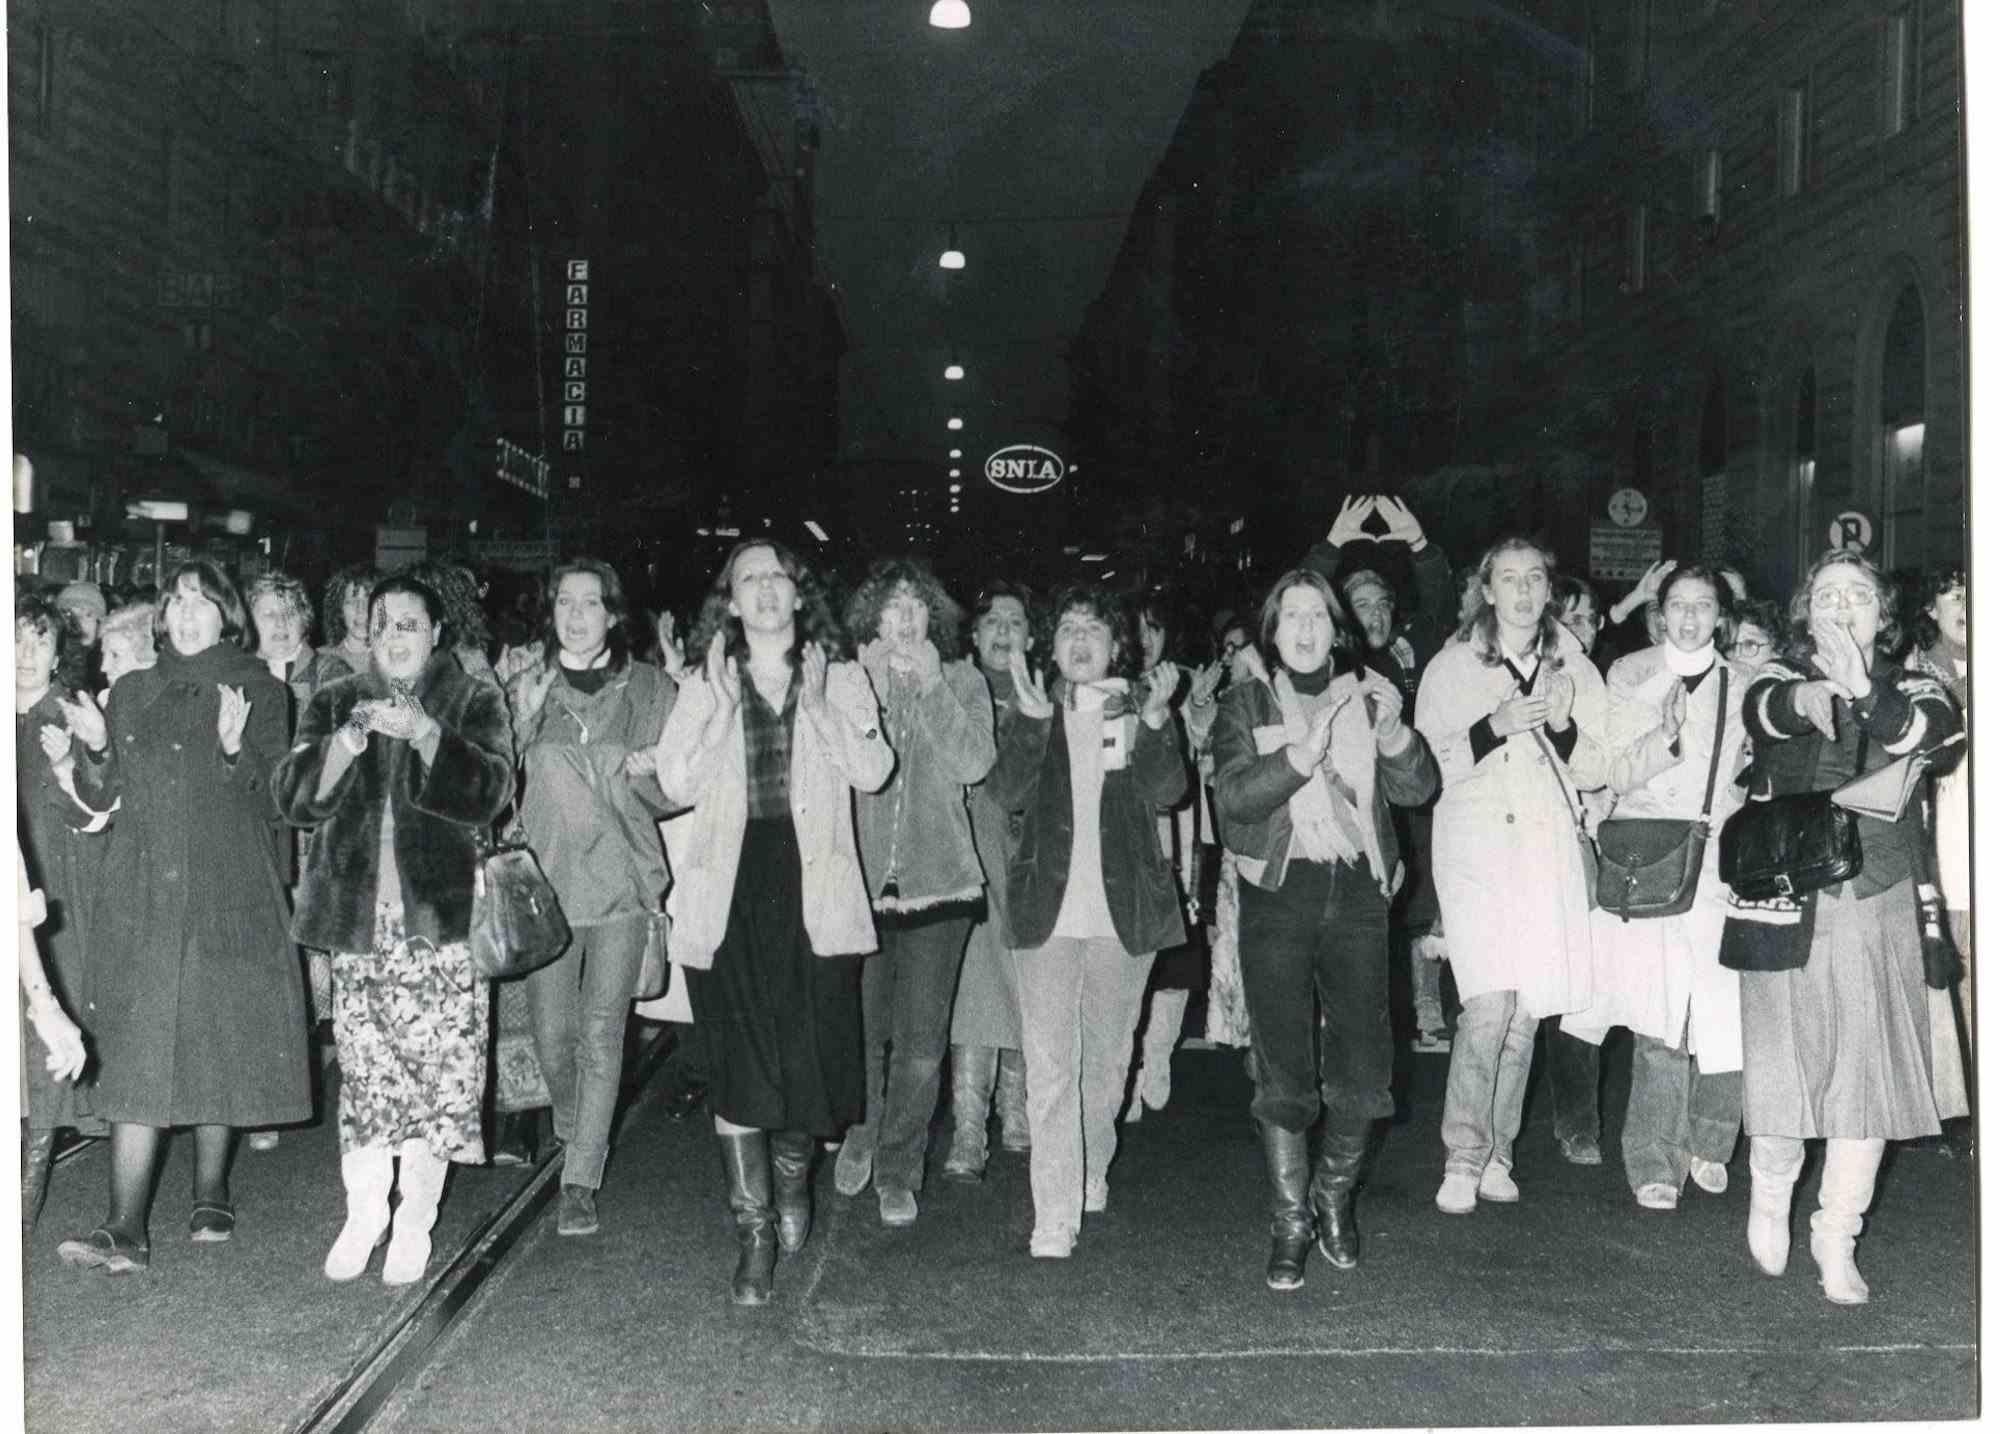 The Protest - Historical Photograph About the Feminist Movement - 1978